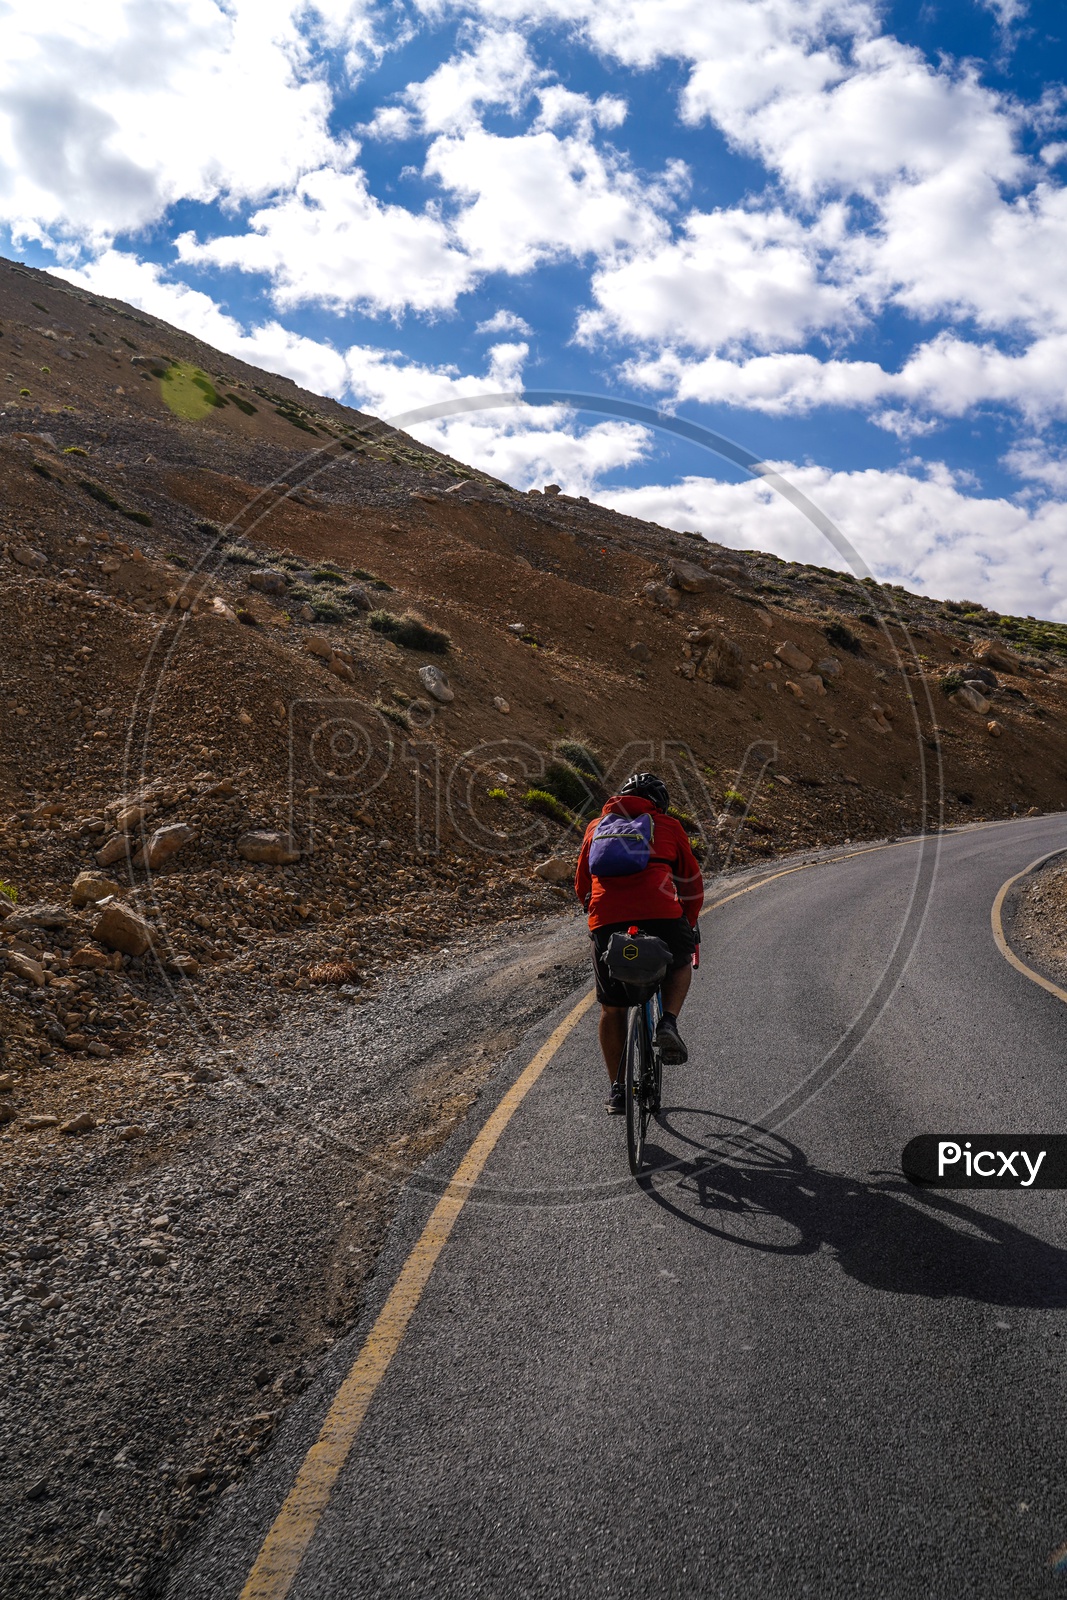 Cyclist  Riding Cycle bike  on The Valley Roads of Leh With a View Of Snow Capped Mountains